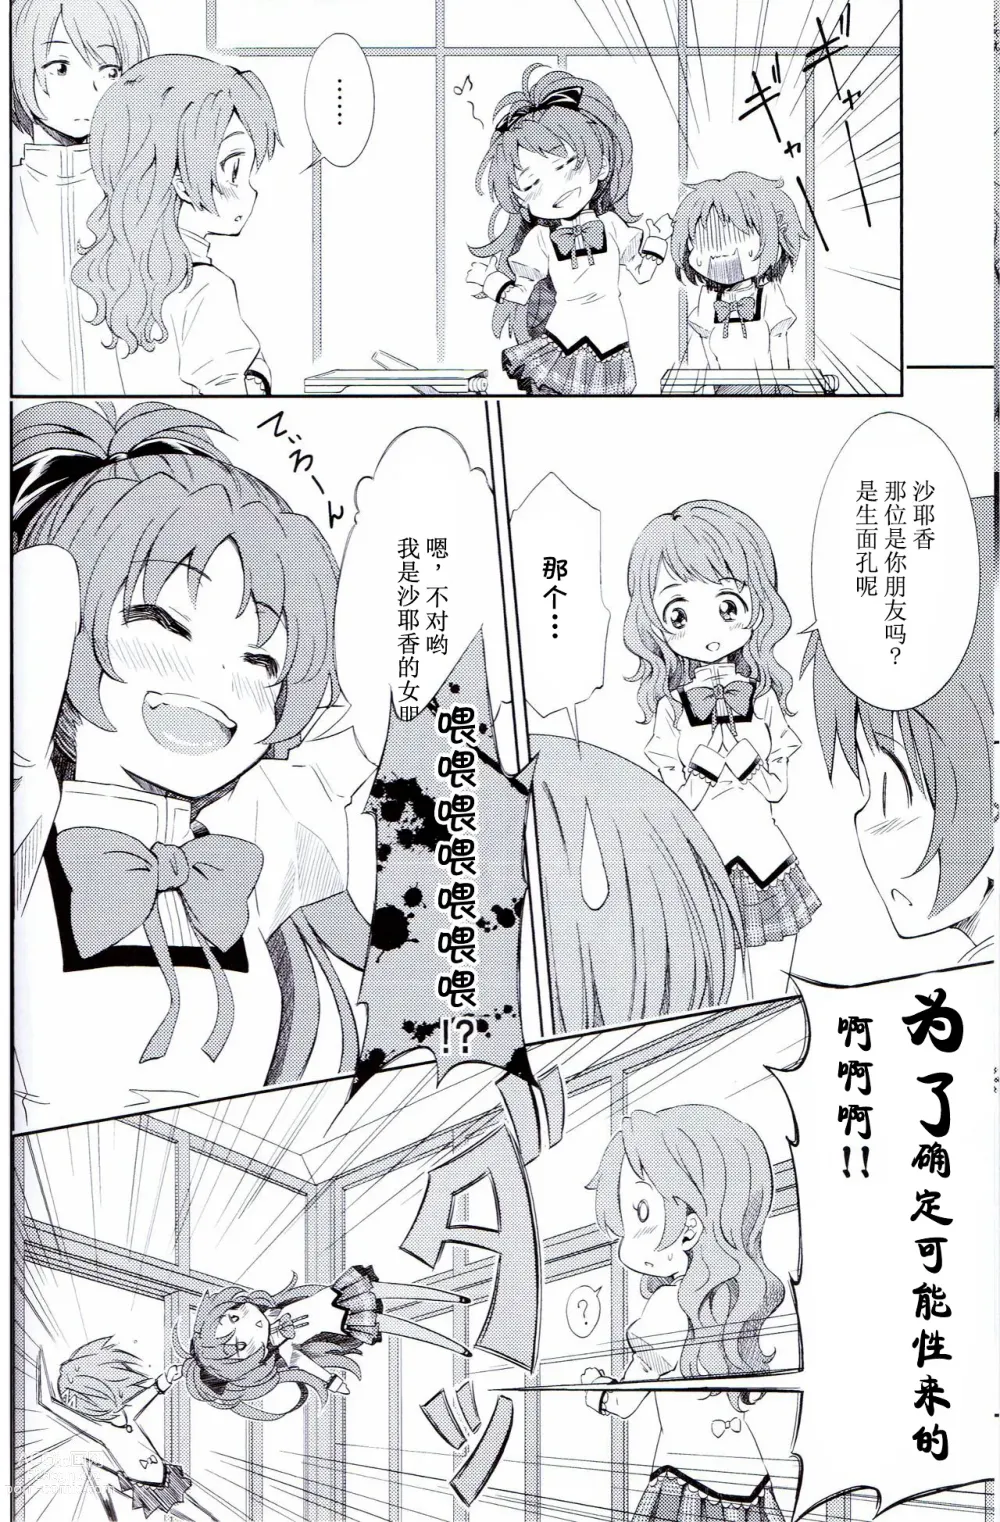 Page 7 of doujinshi Lovely Girls Lily vol. 5